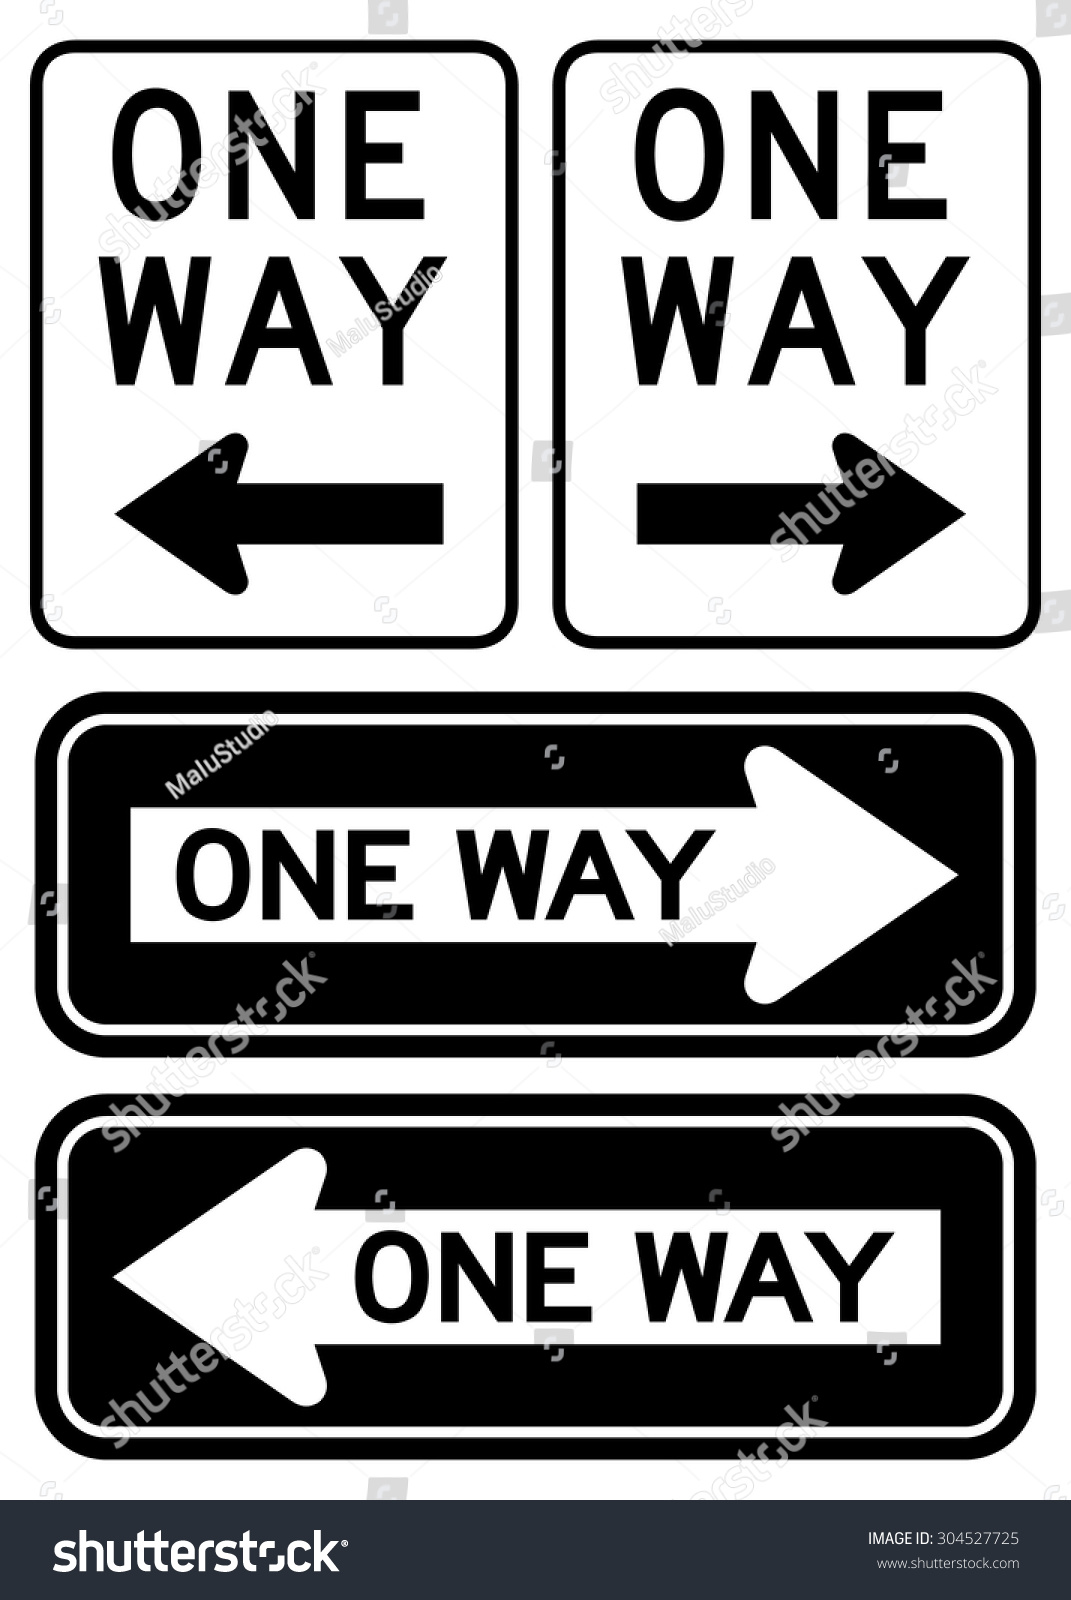 One Way Sign Set Stock Vector (Royalty Free) 304527725 | Shutterstock